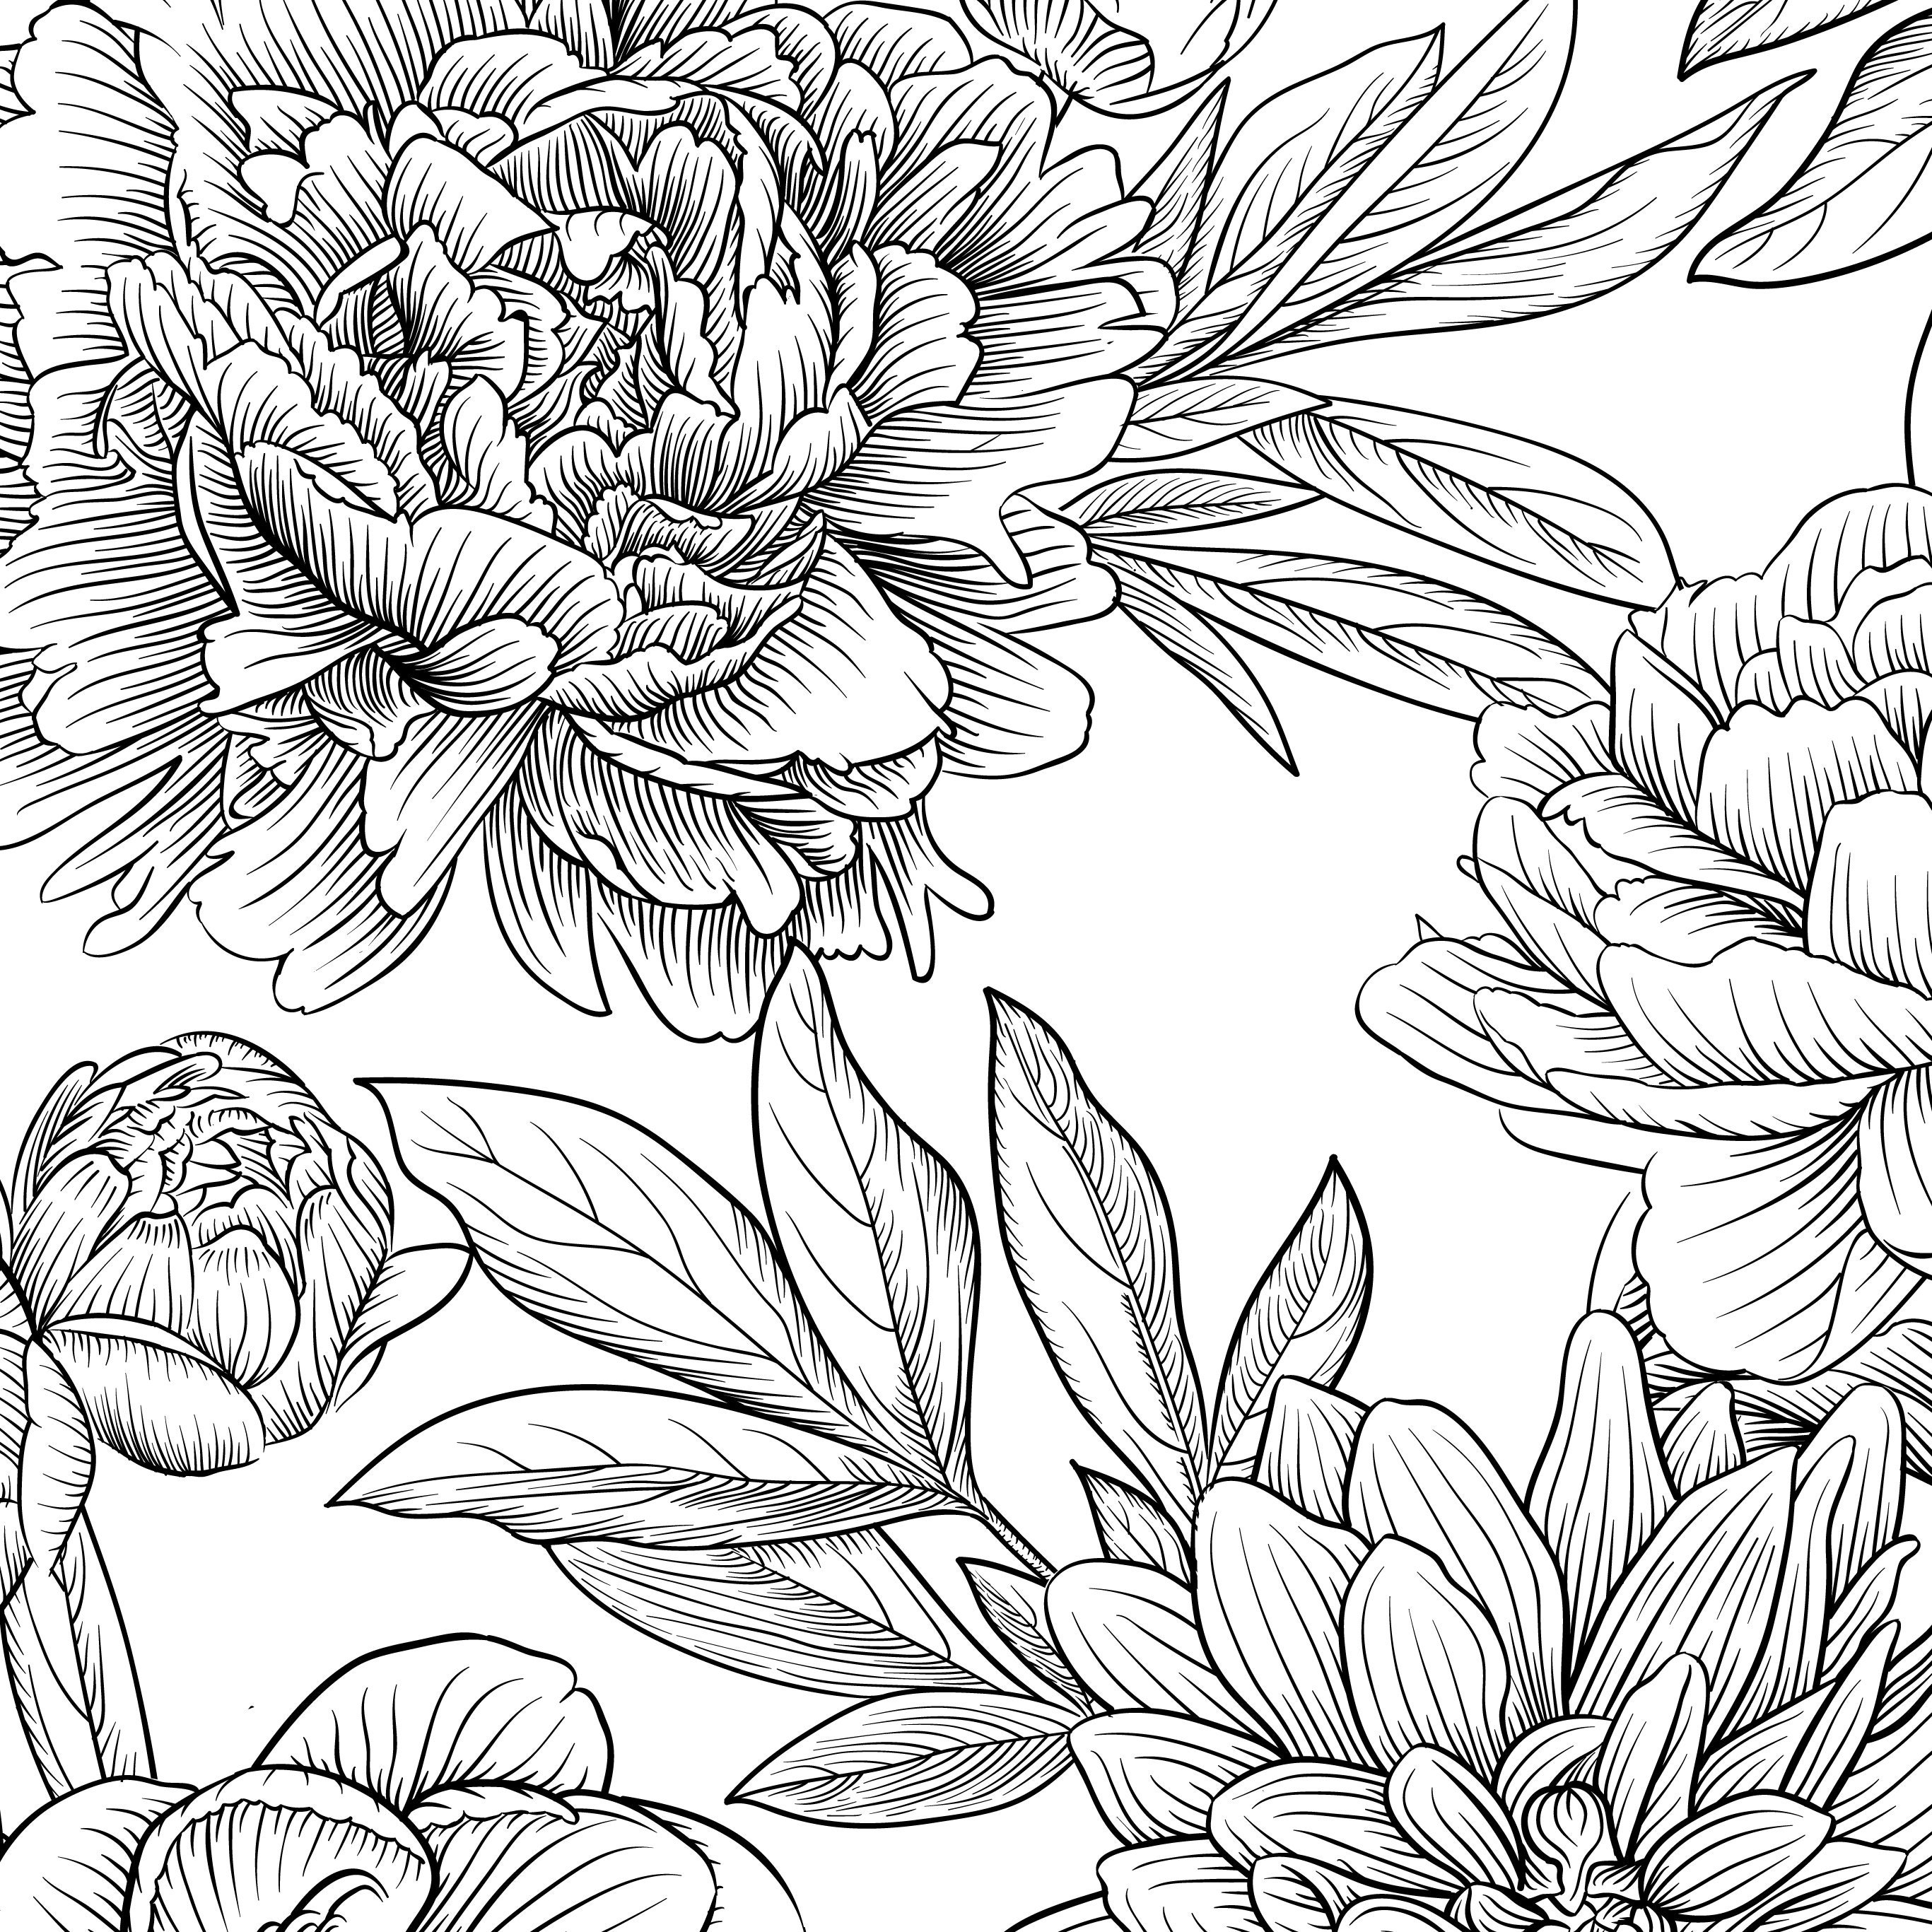 Black & White Peony Removable Wallpaper Peel and Stick | Etsy